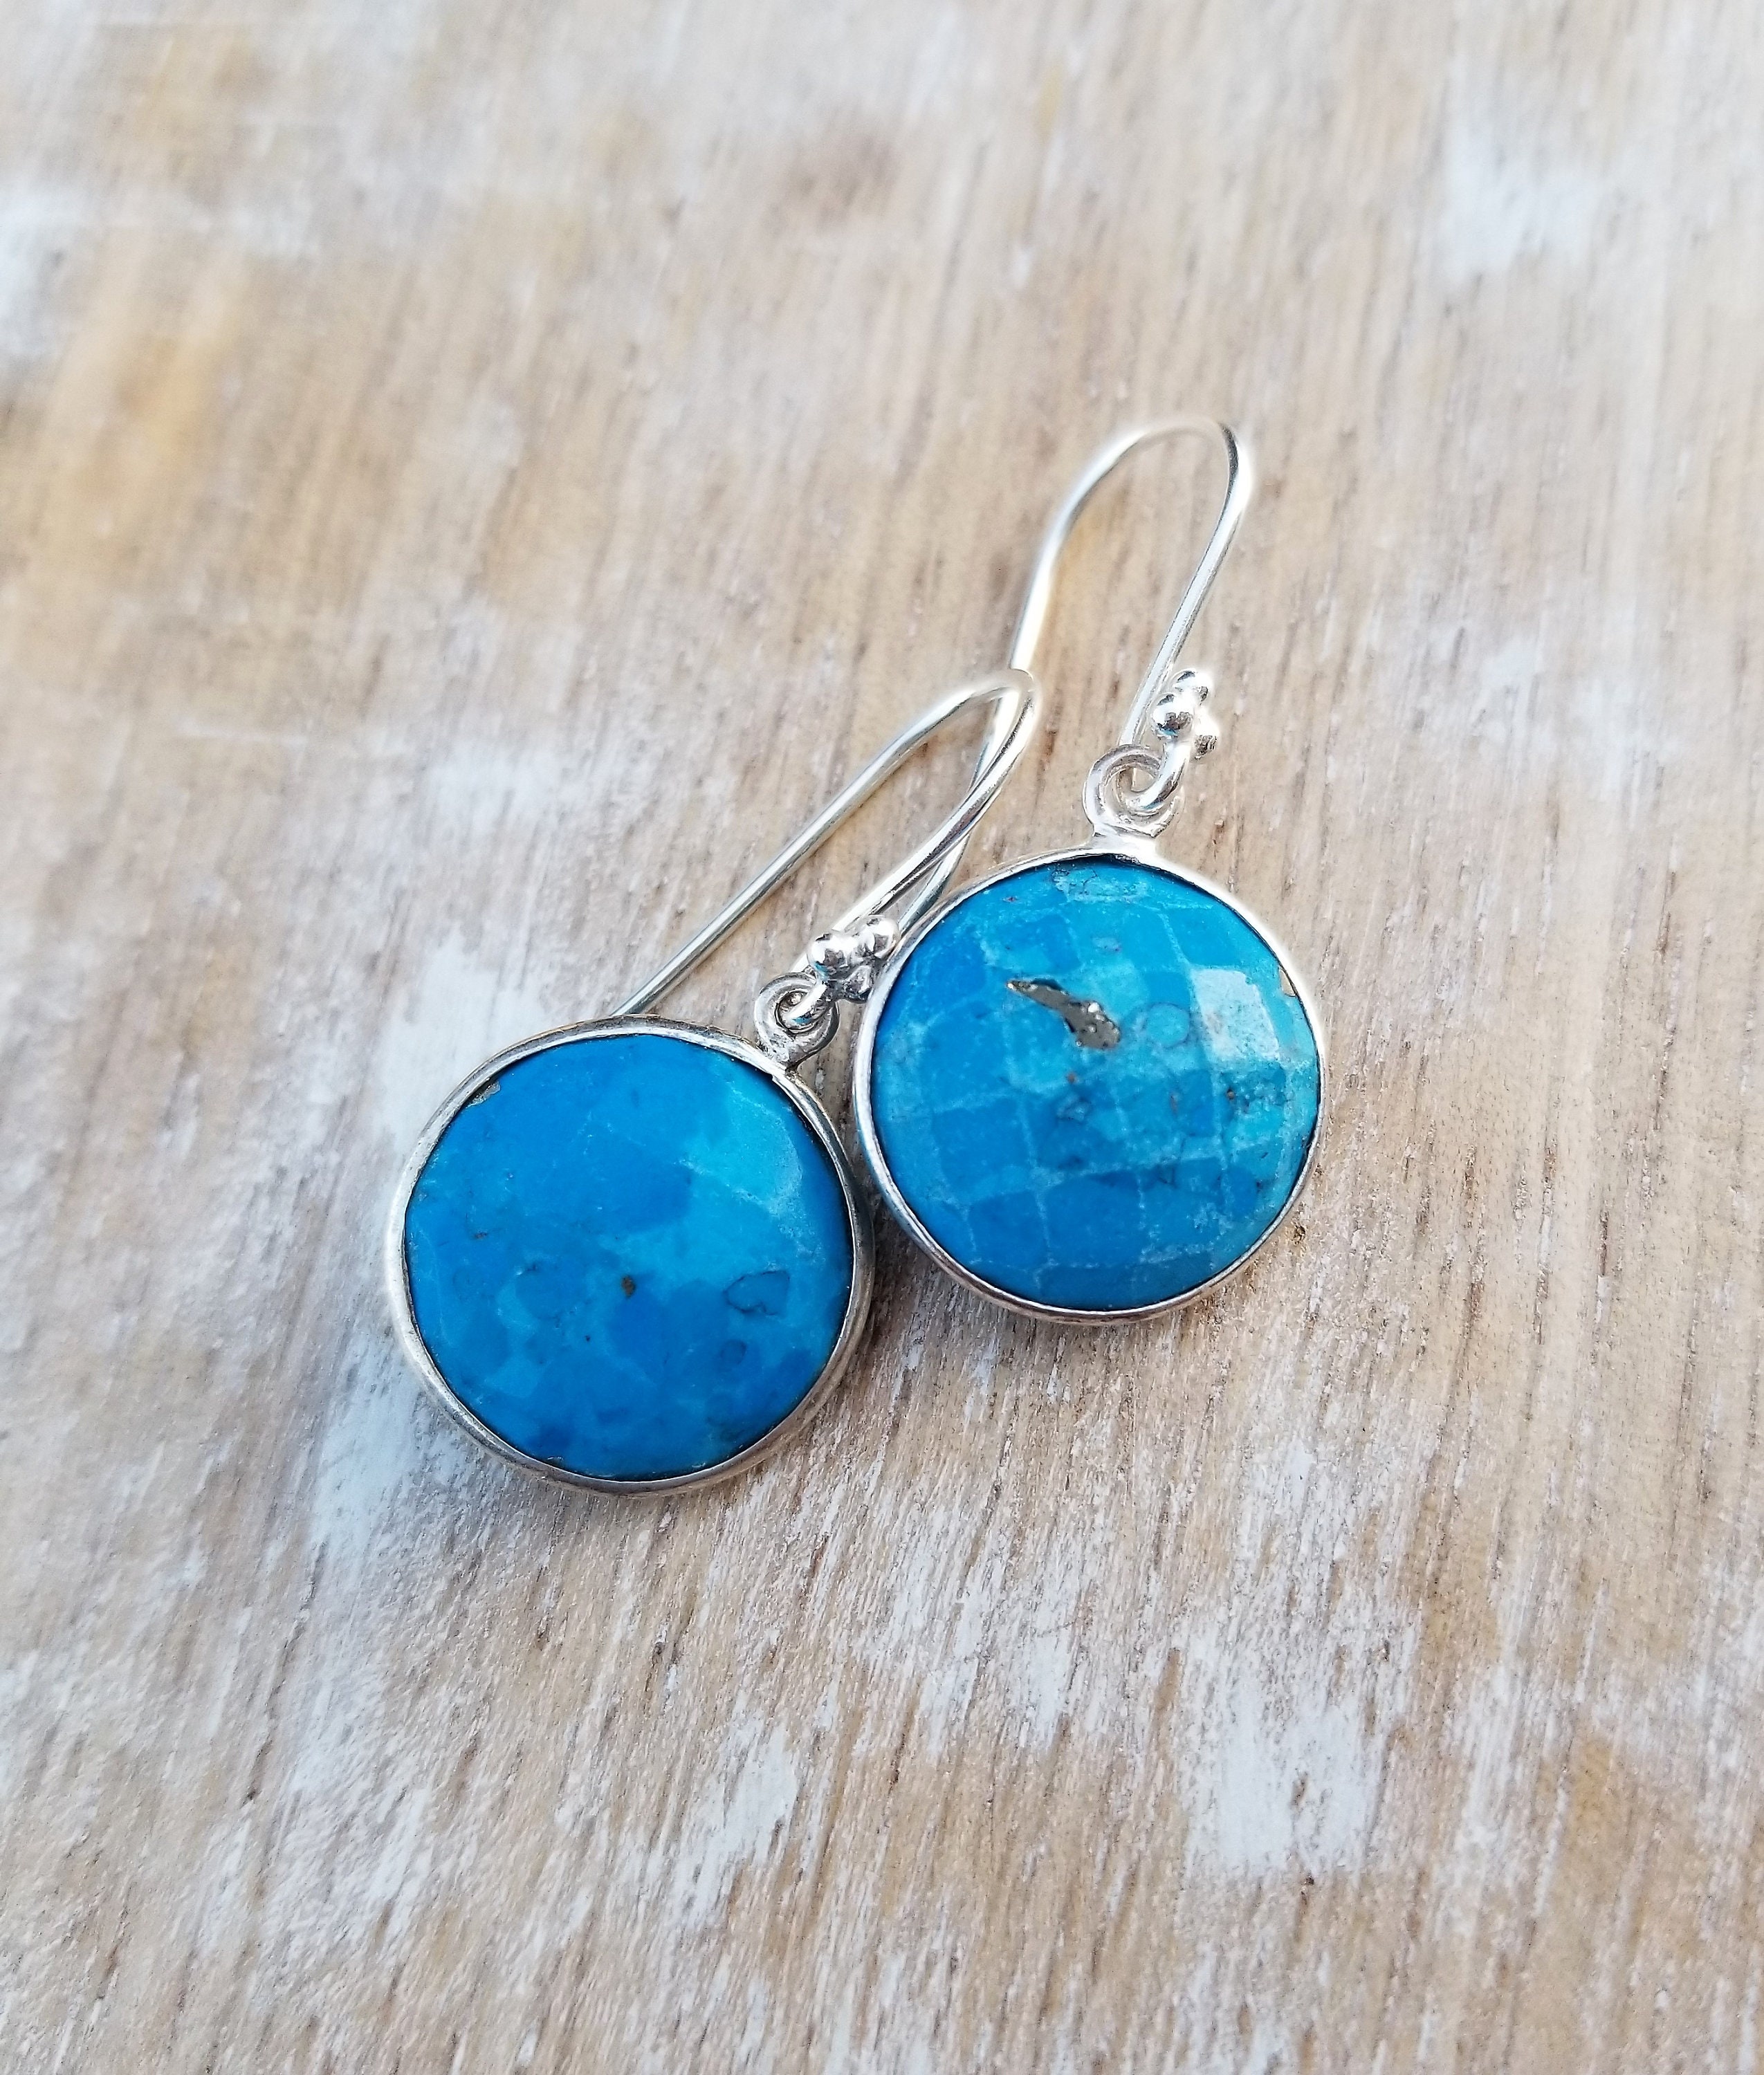 Blue Turquoise Earrings Sterling Silver Round Gemstone | Etsy